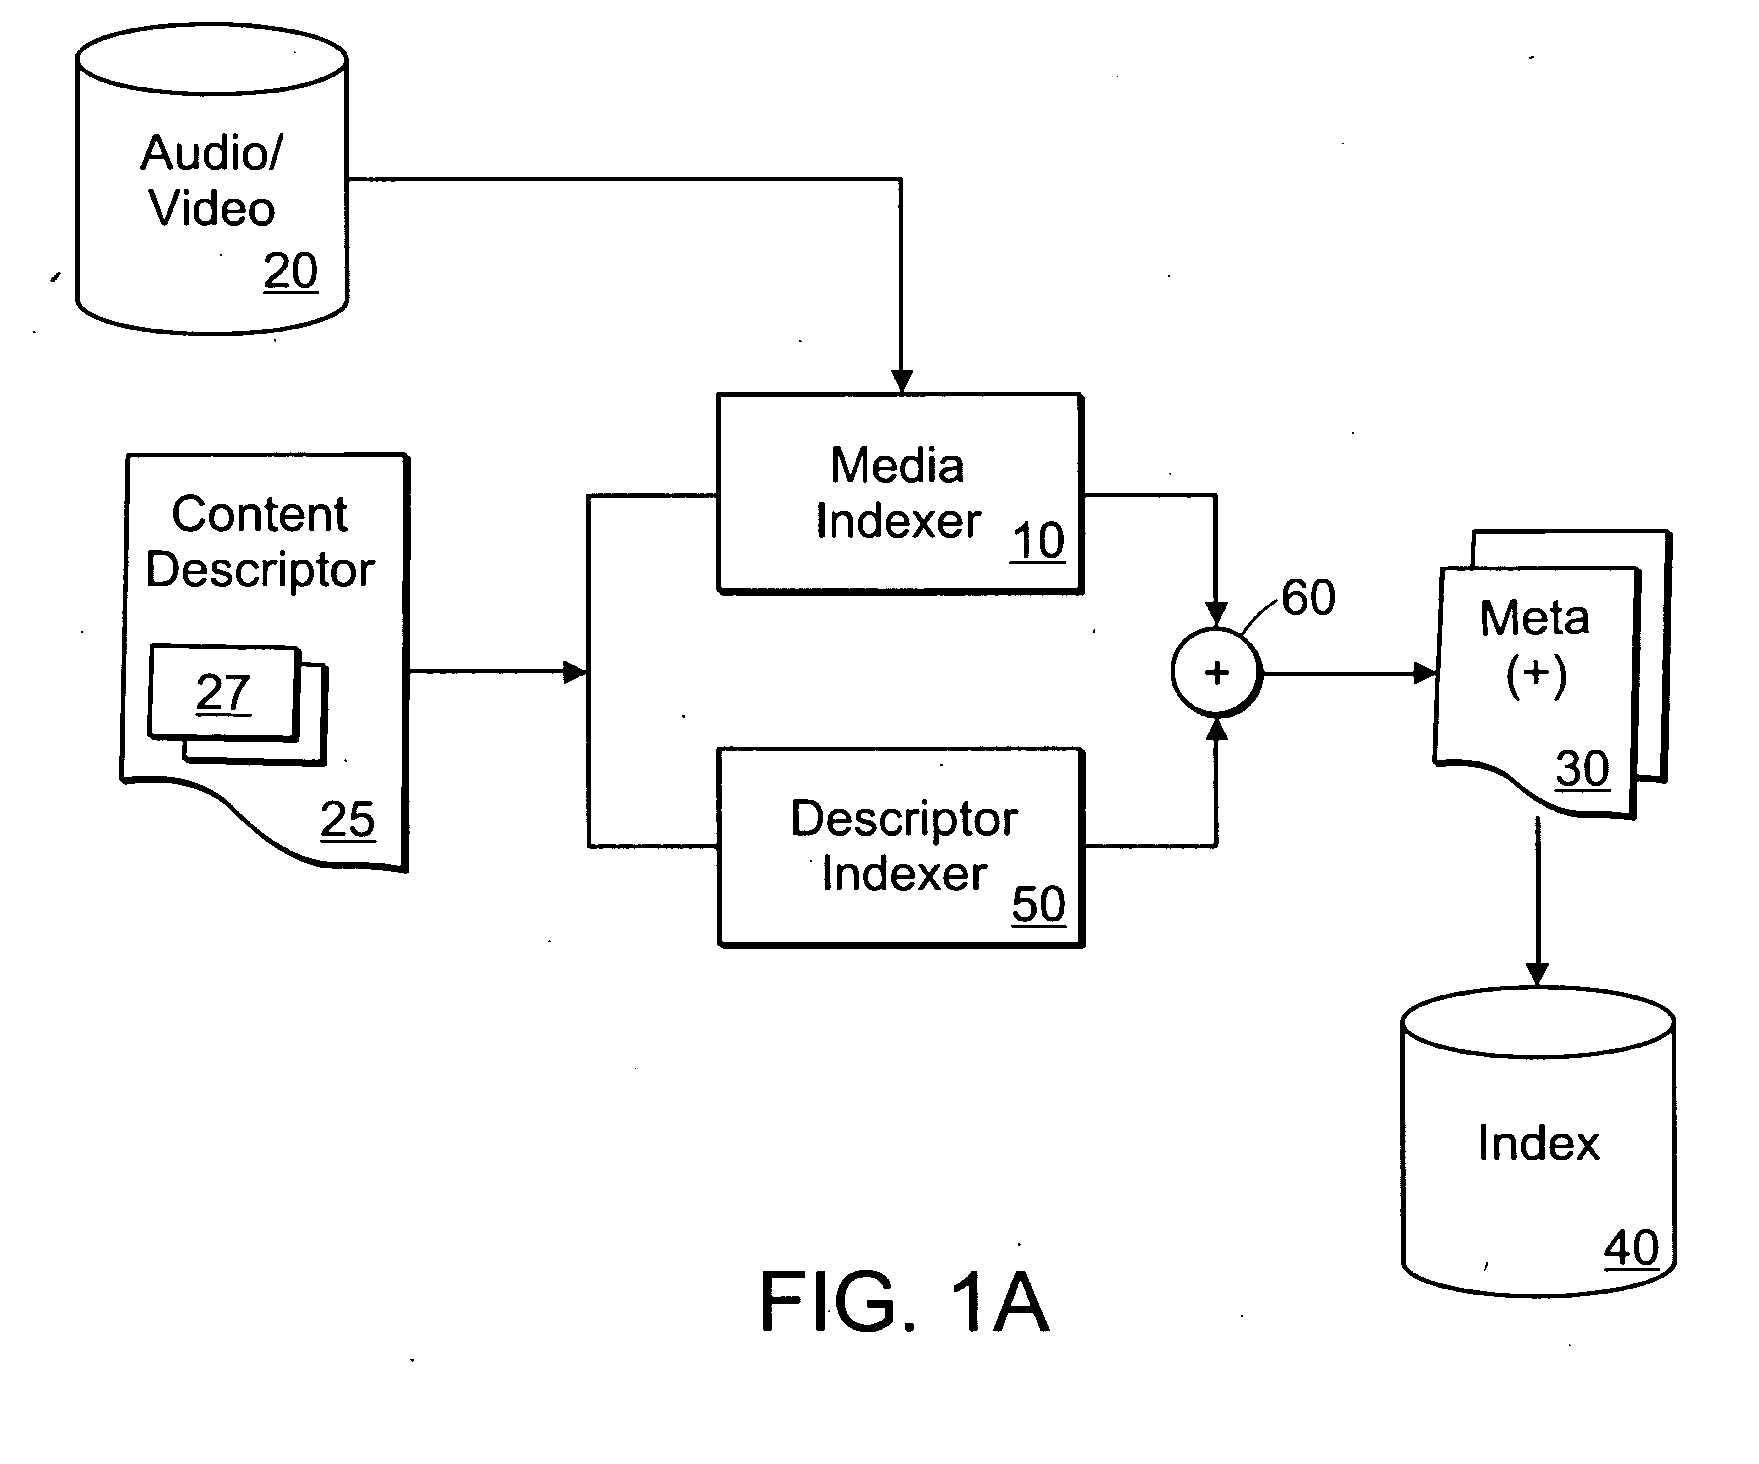 Method and apparatus for using confidence scores of enhanced metadata in search-driven media applications